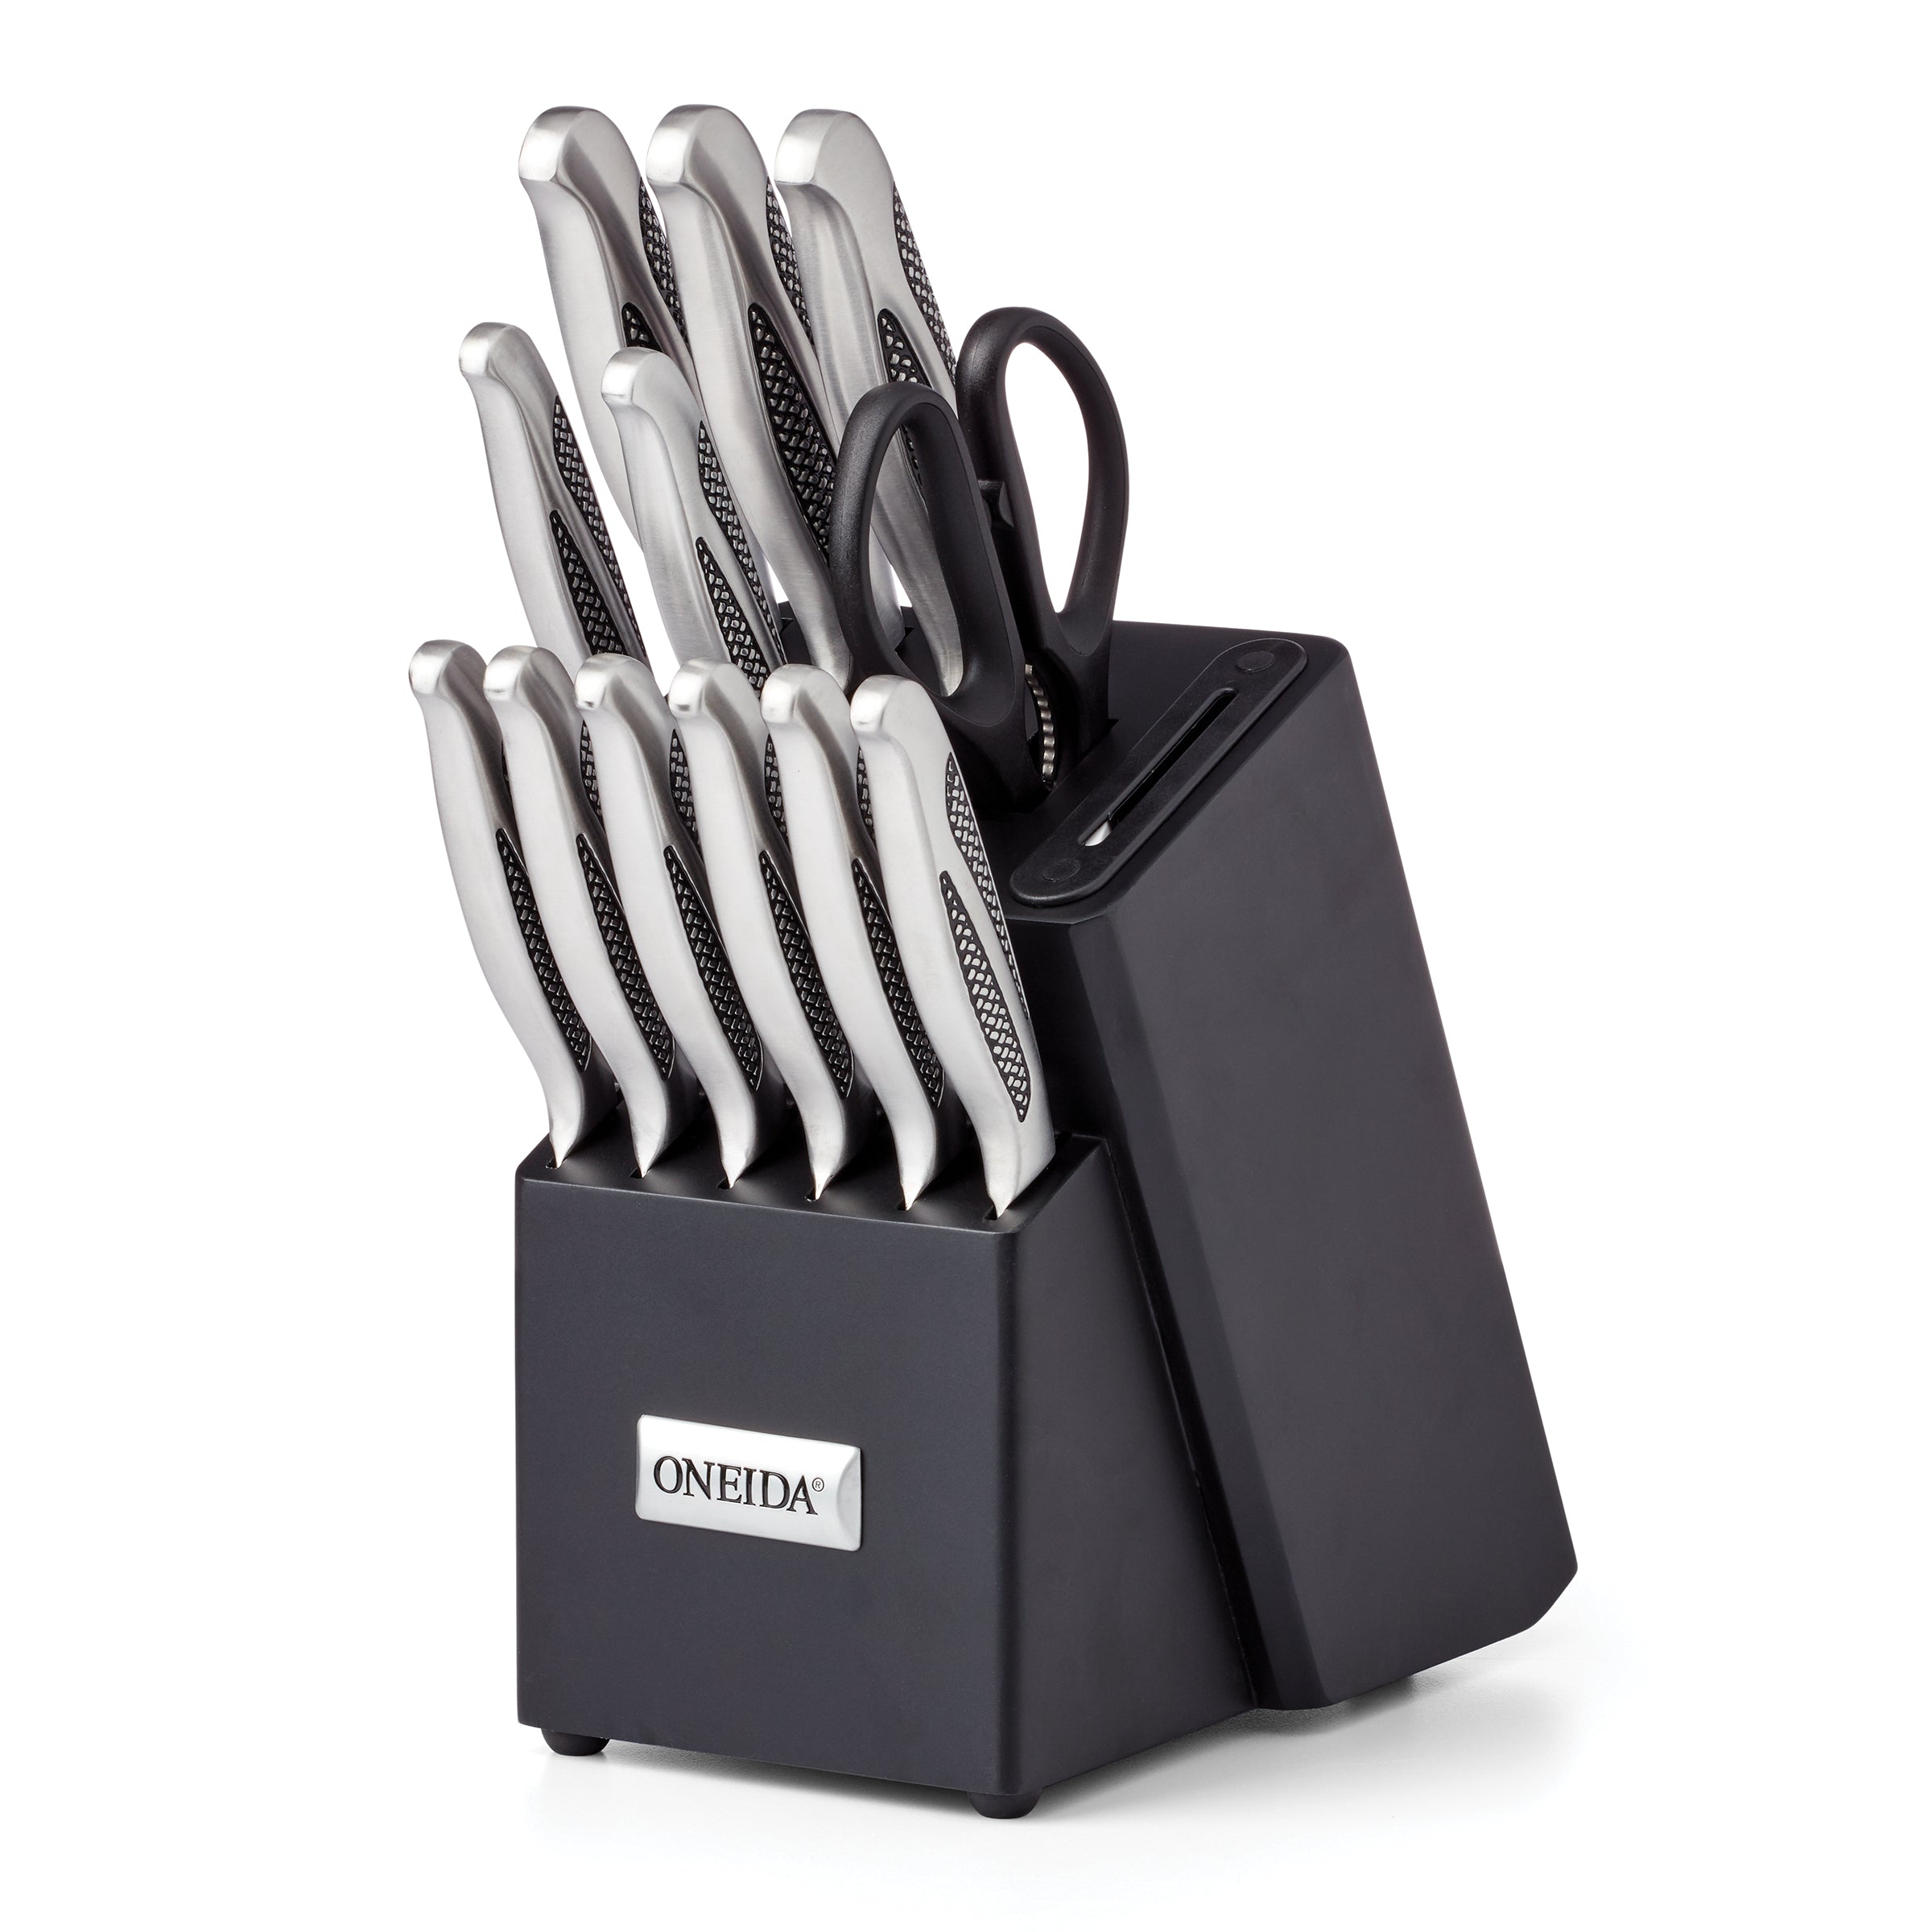 The Pioneer Woman Pioneer Signature 14-Piece Stainless Steel Knife Block Set, Gray